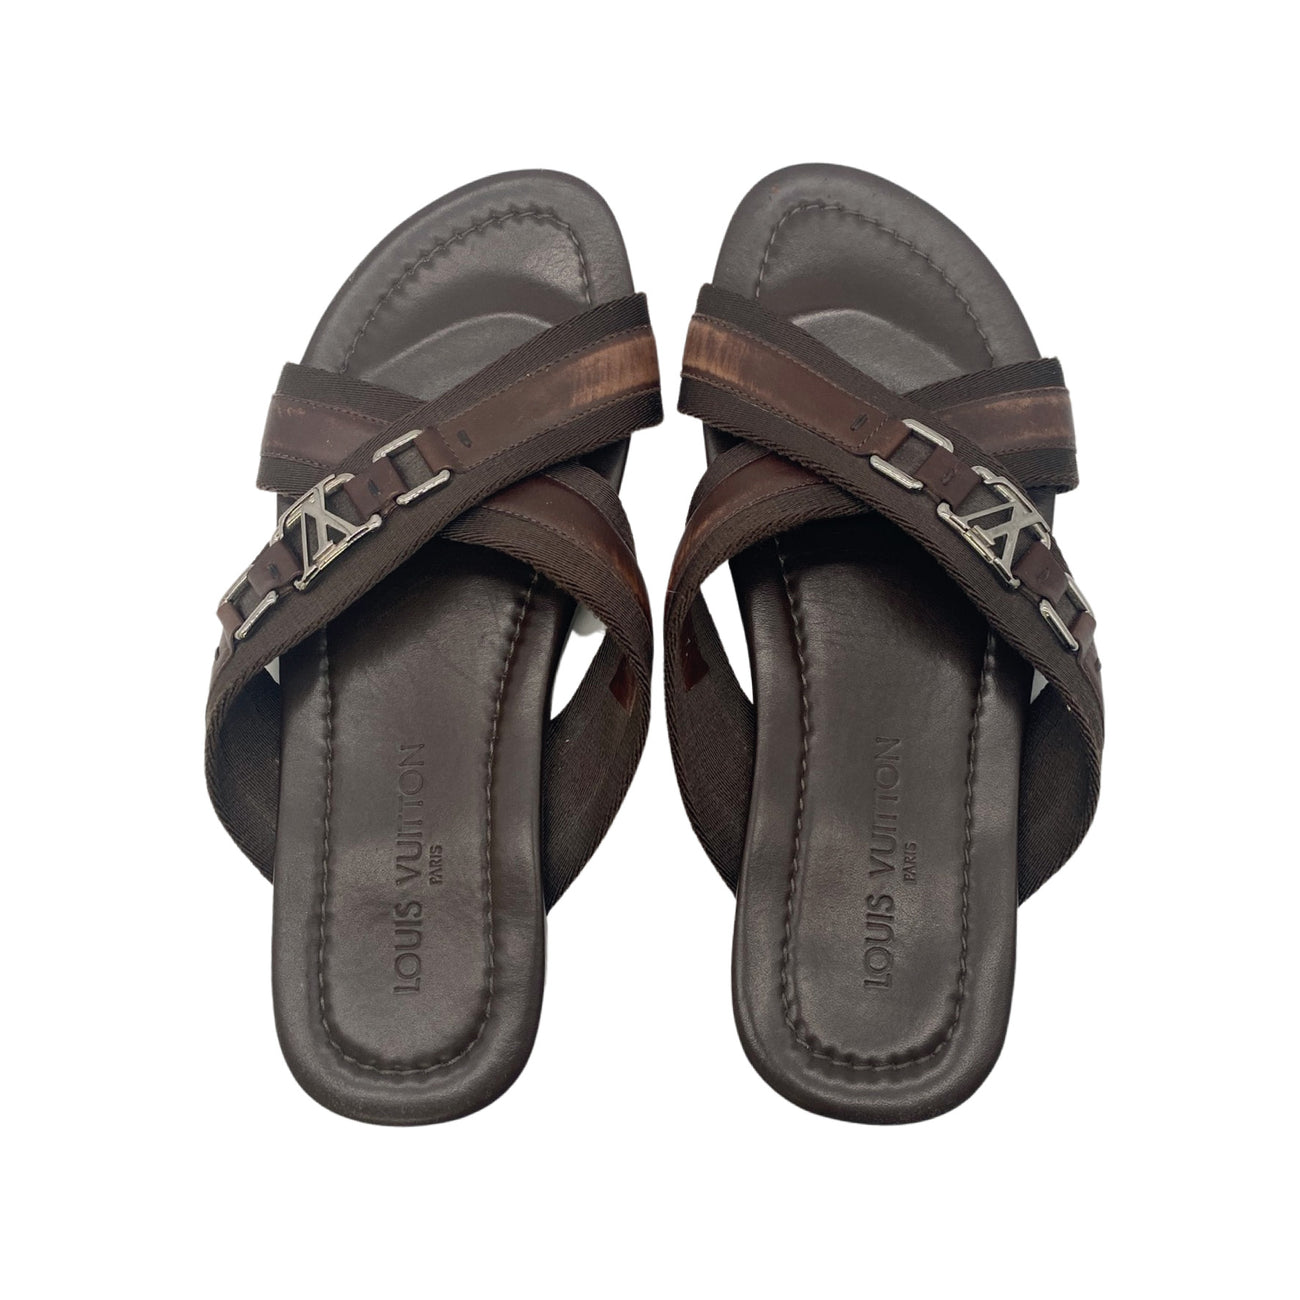 Leather sandals Louis Vuitton Brown size 8.5 UK in Leather - 24528897